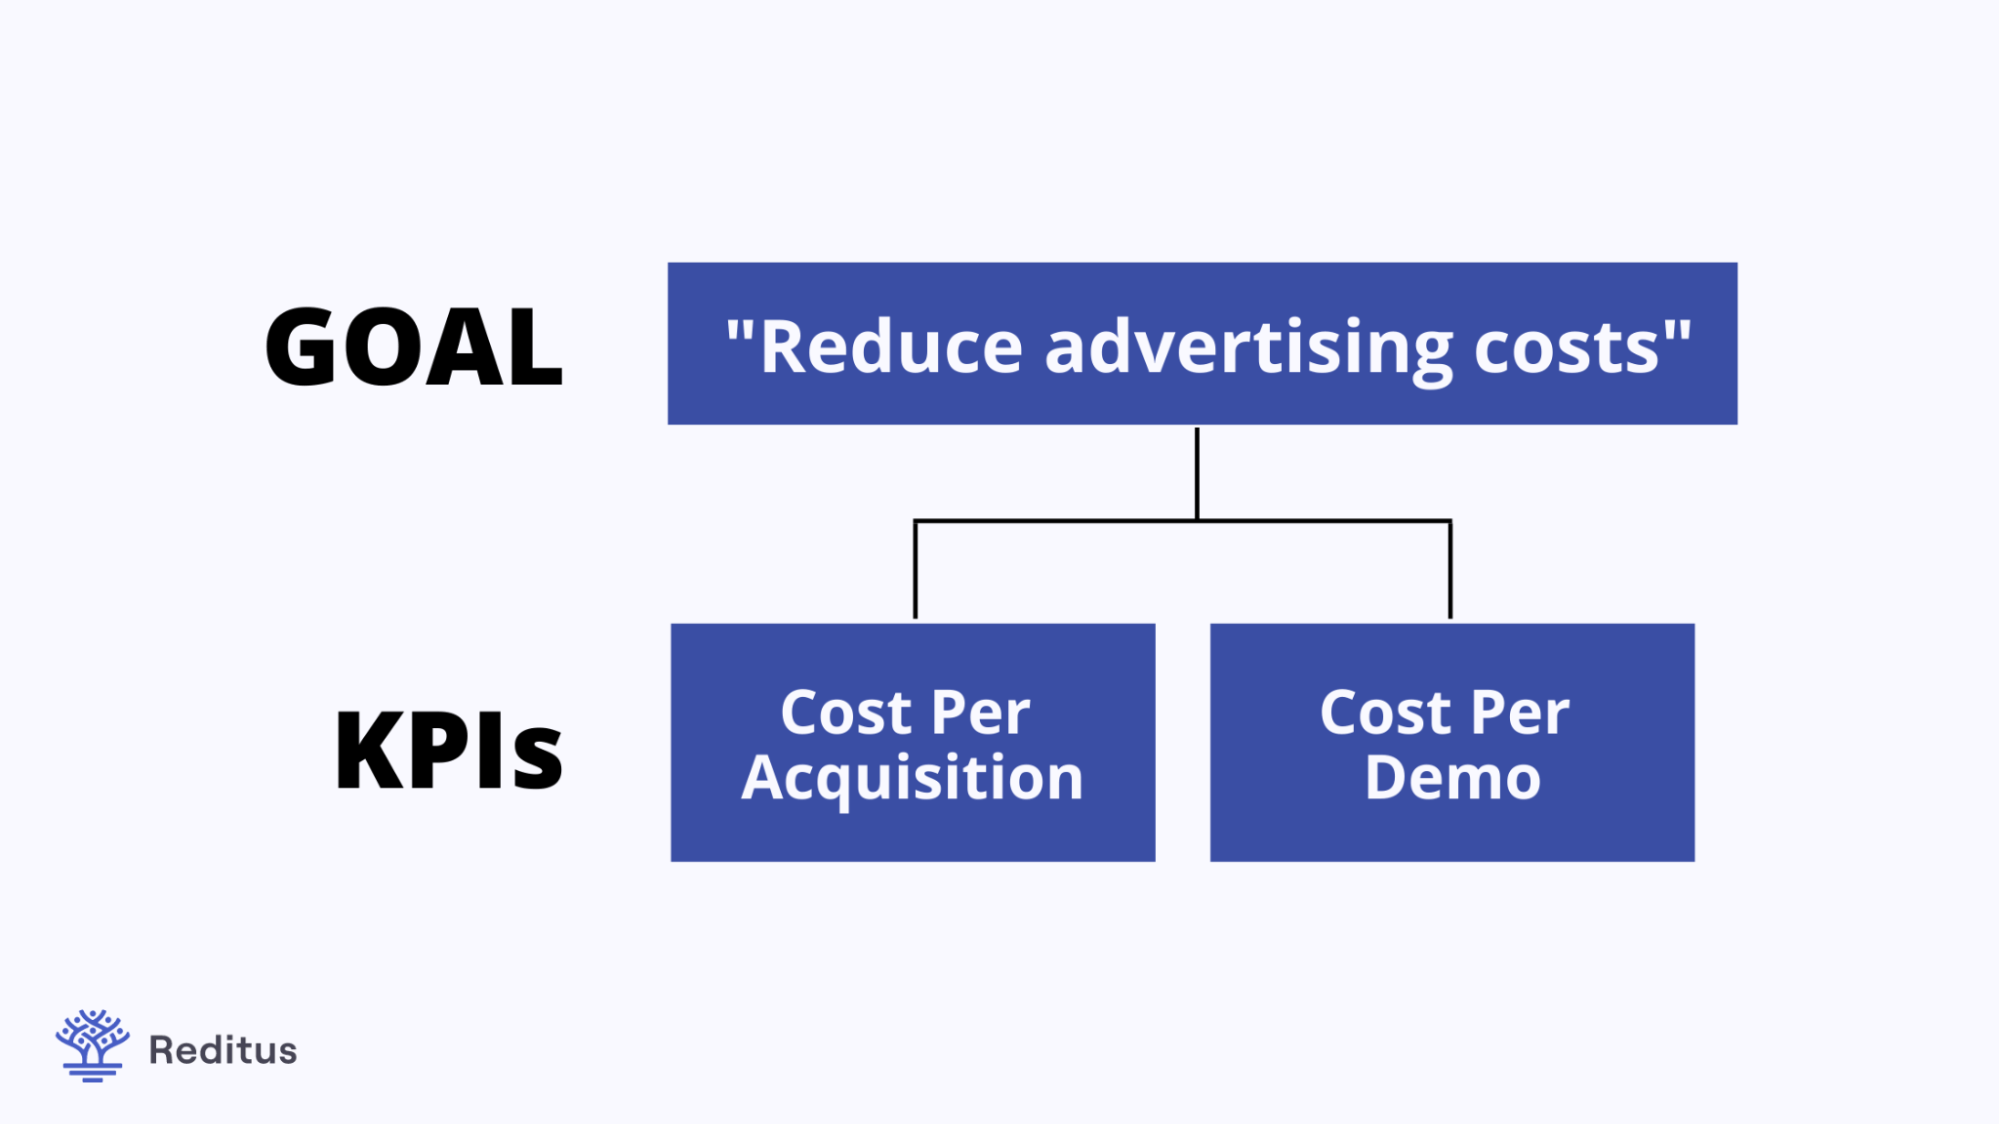 An illustration of goals and KPIs